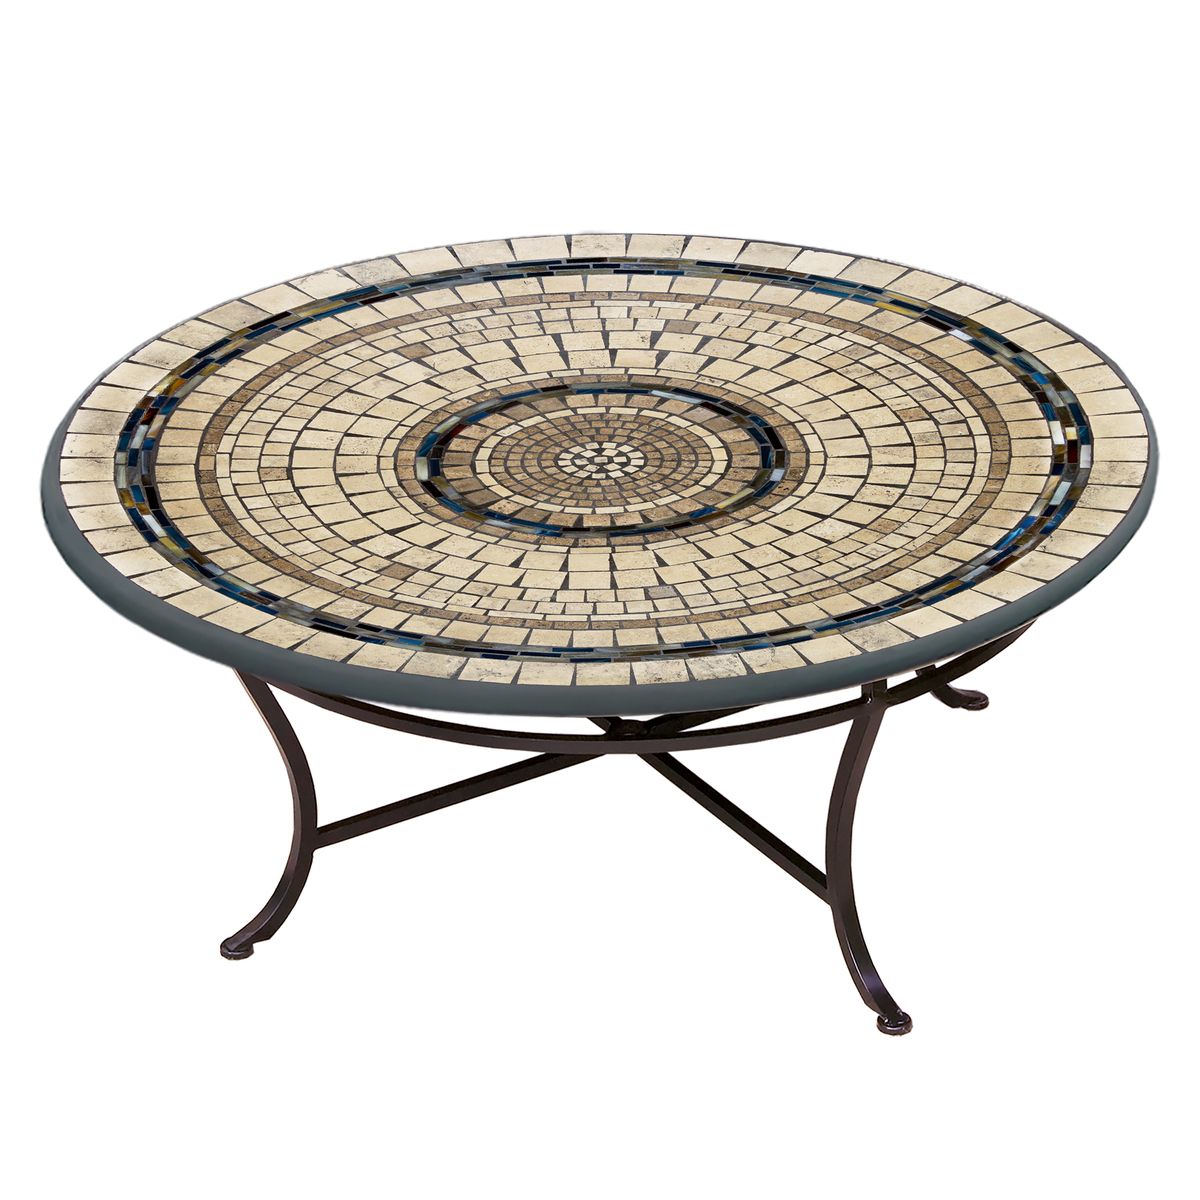 Slate Stone Mosaic Coffee Table-Iron Accents